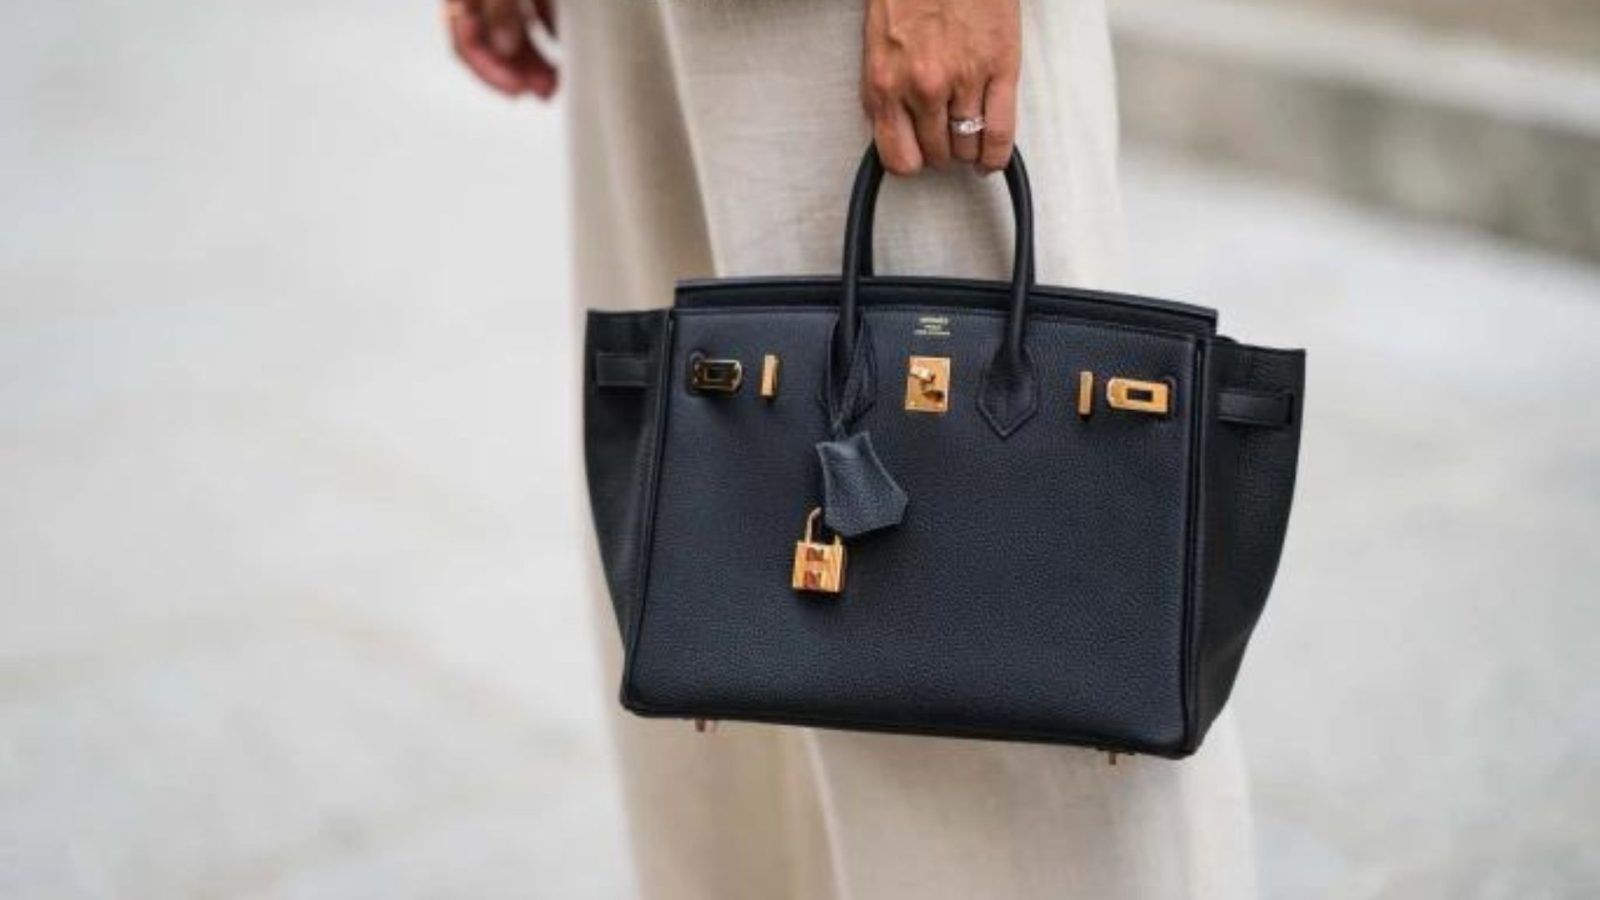 The Iconic Hermes Birkin Bag Will Become More Expensive From 2023